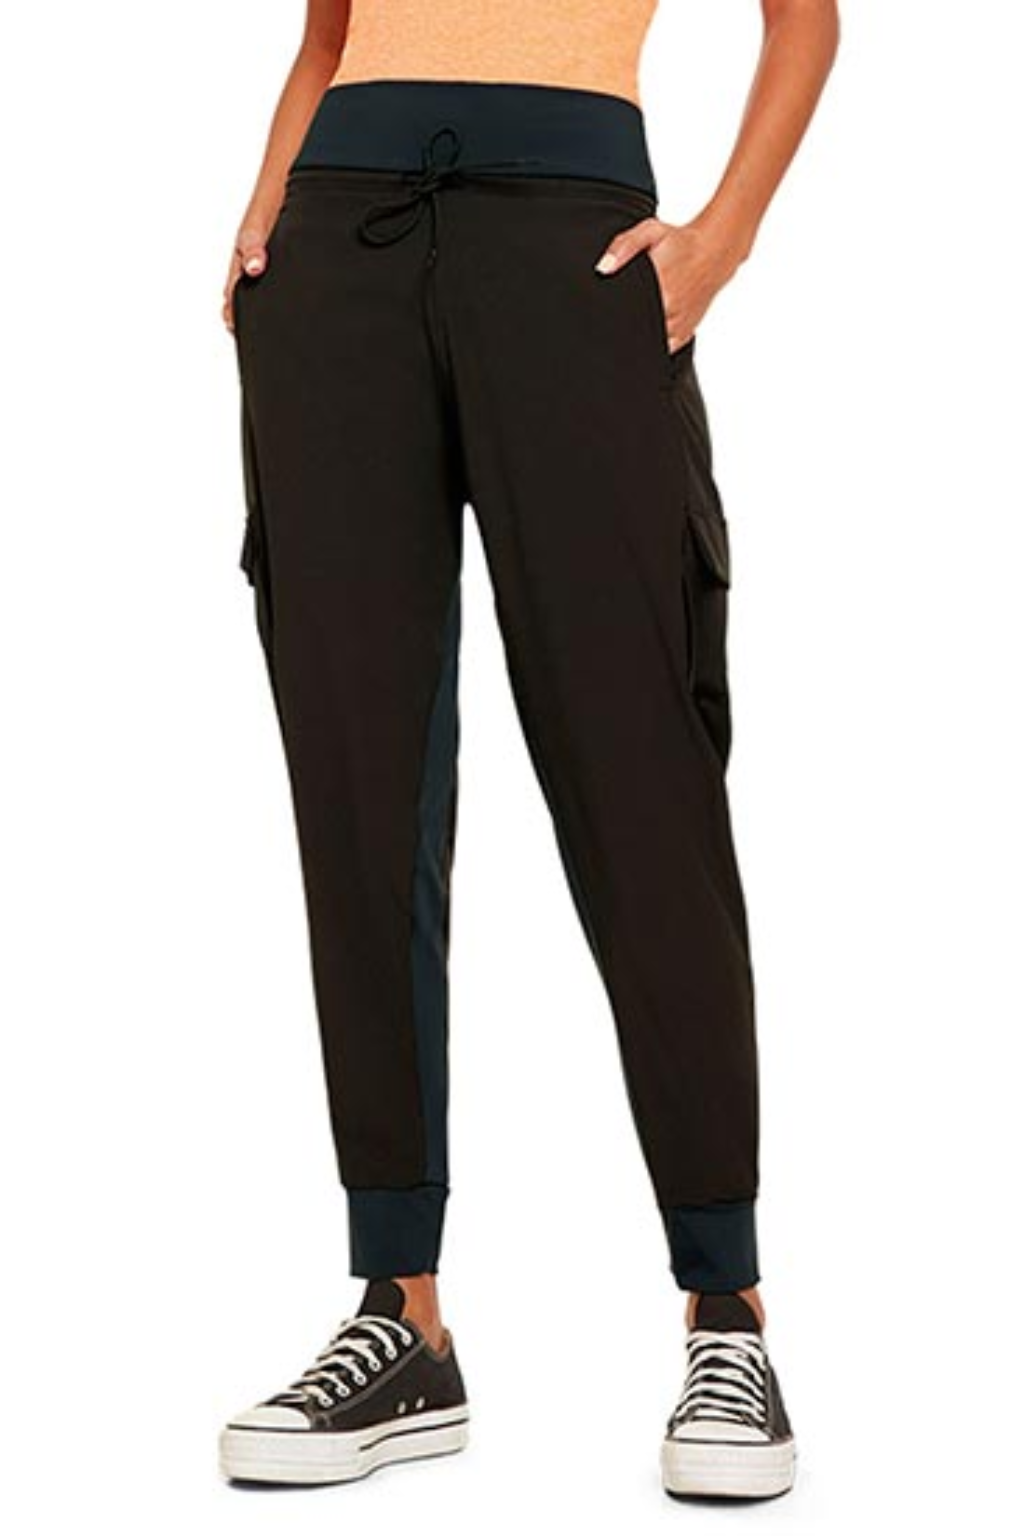 Extremely Comfortable Jogging Pants